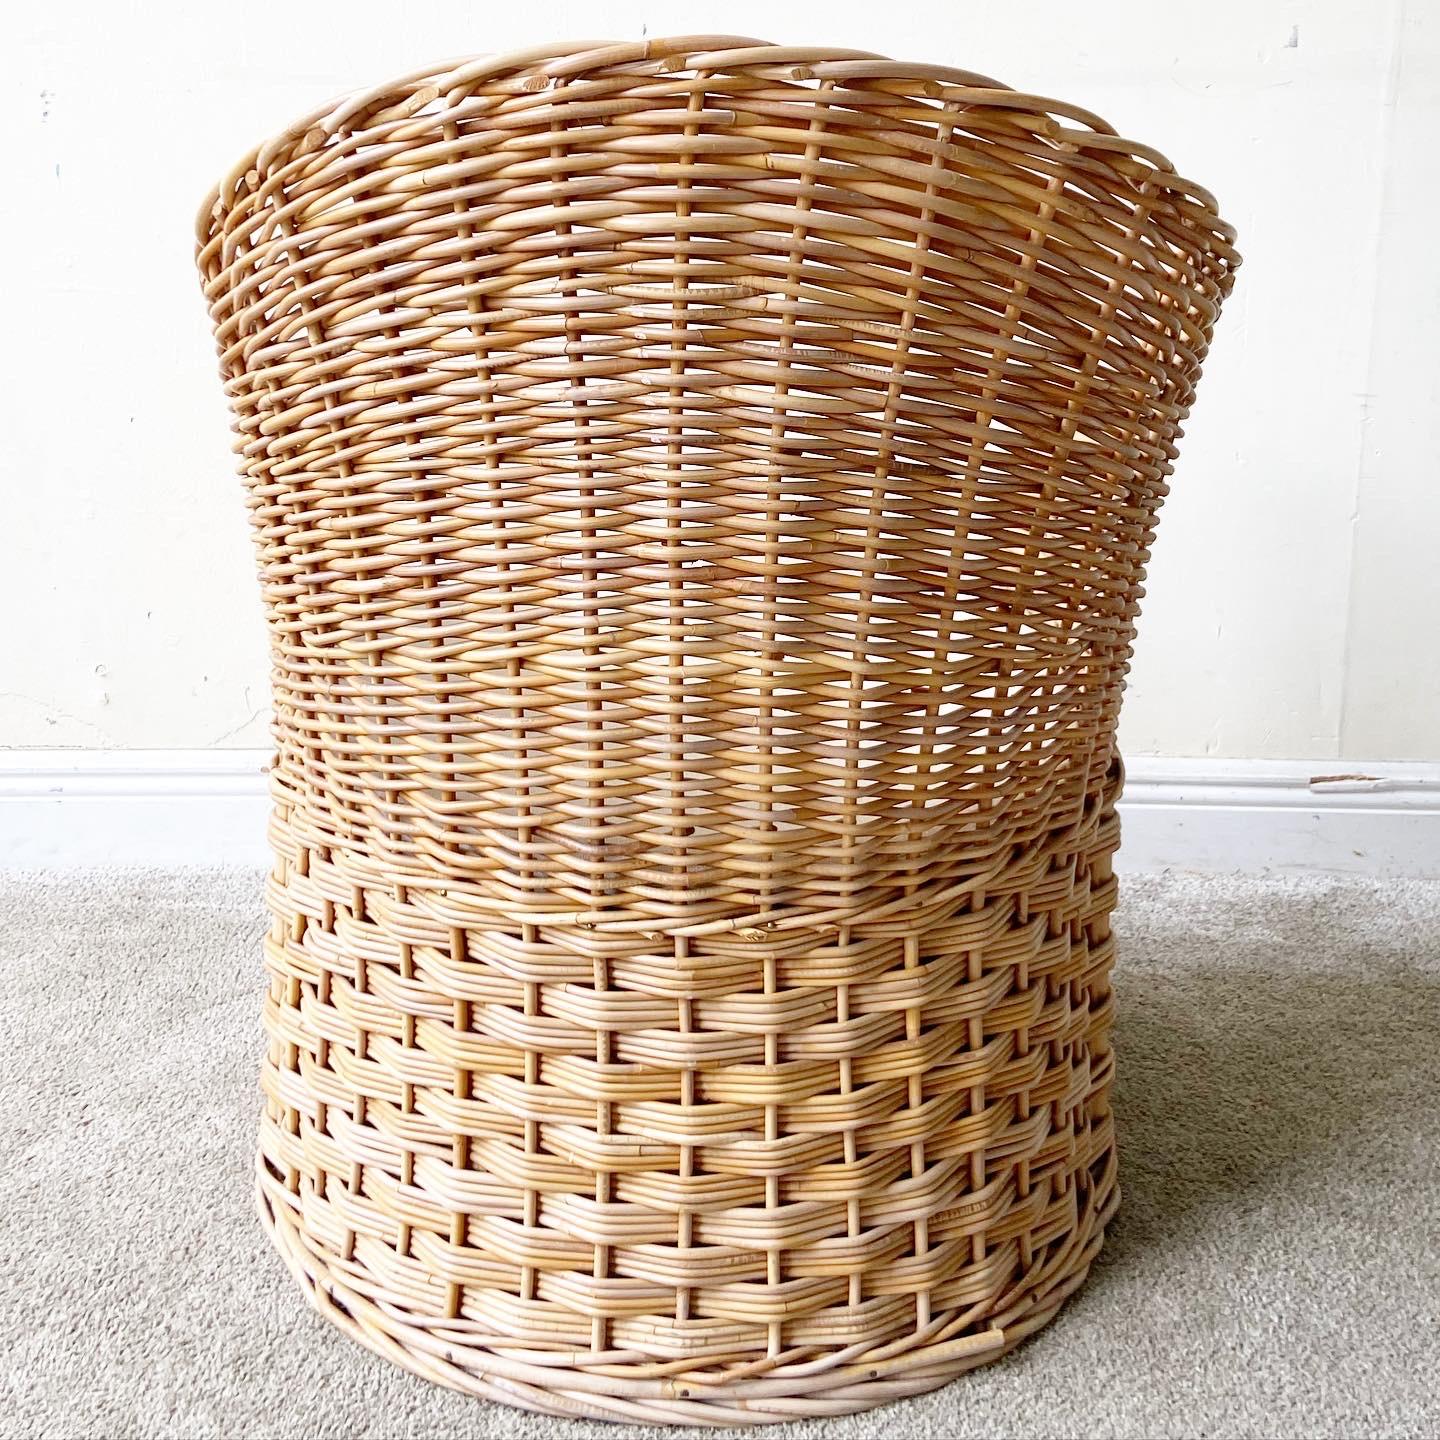 Late 20th Century 1980s Boho Chic Wicker Barrel Chair With Tufted White Cushions For Sale